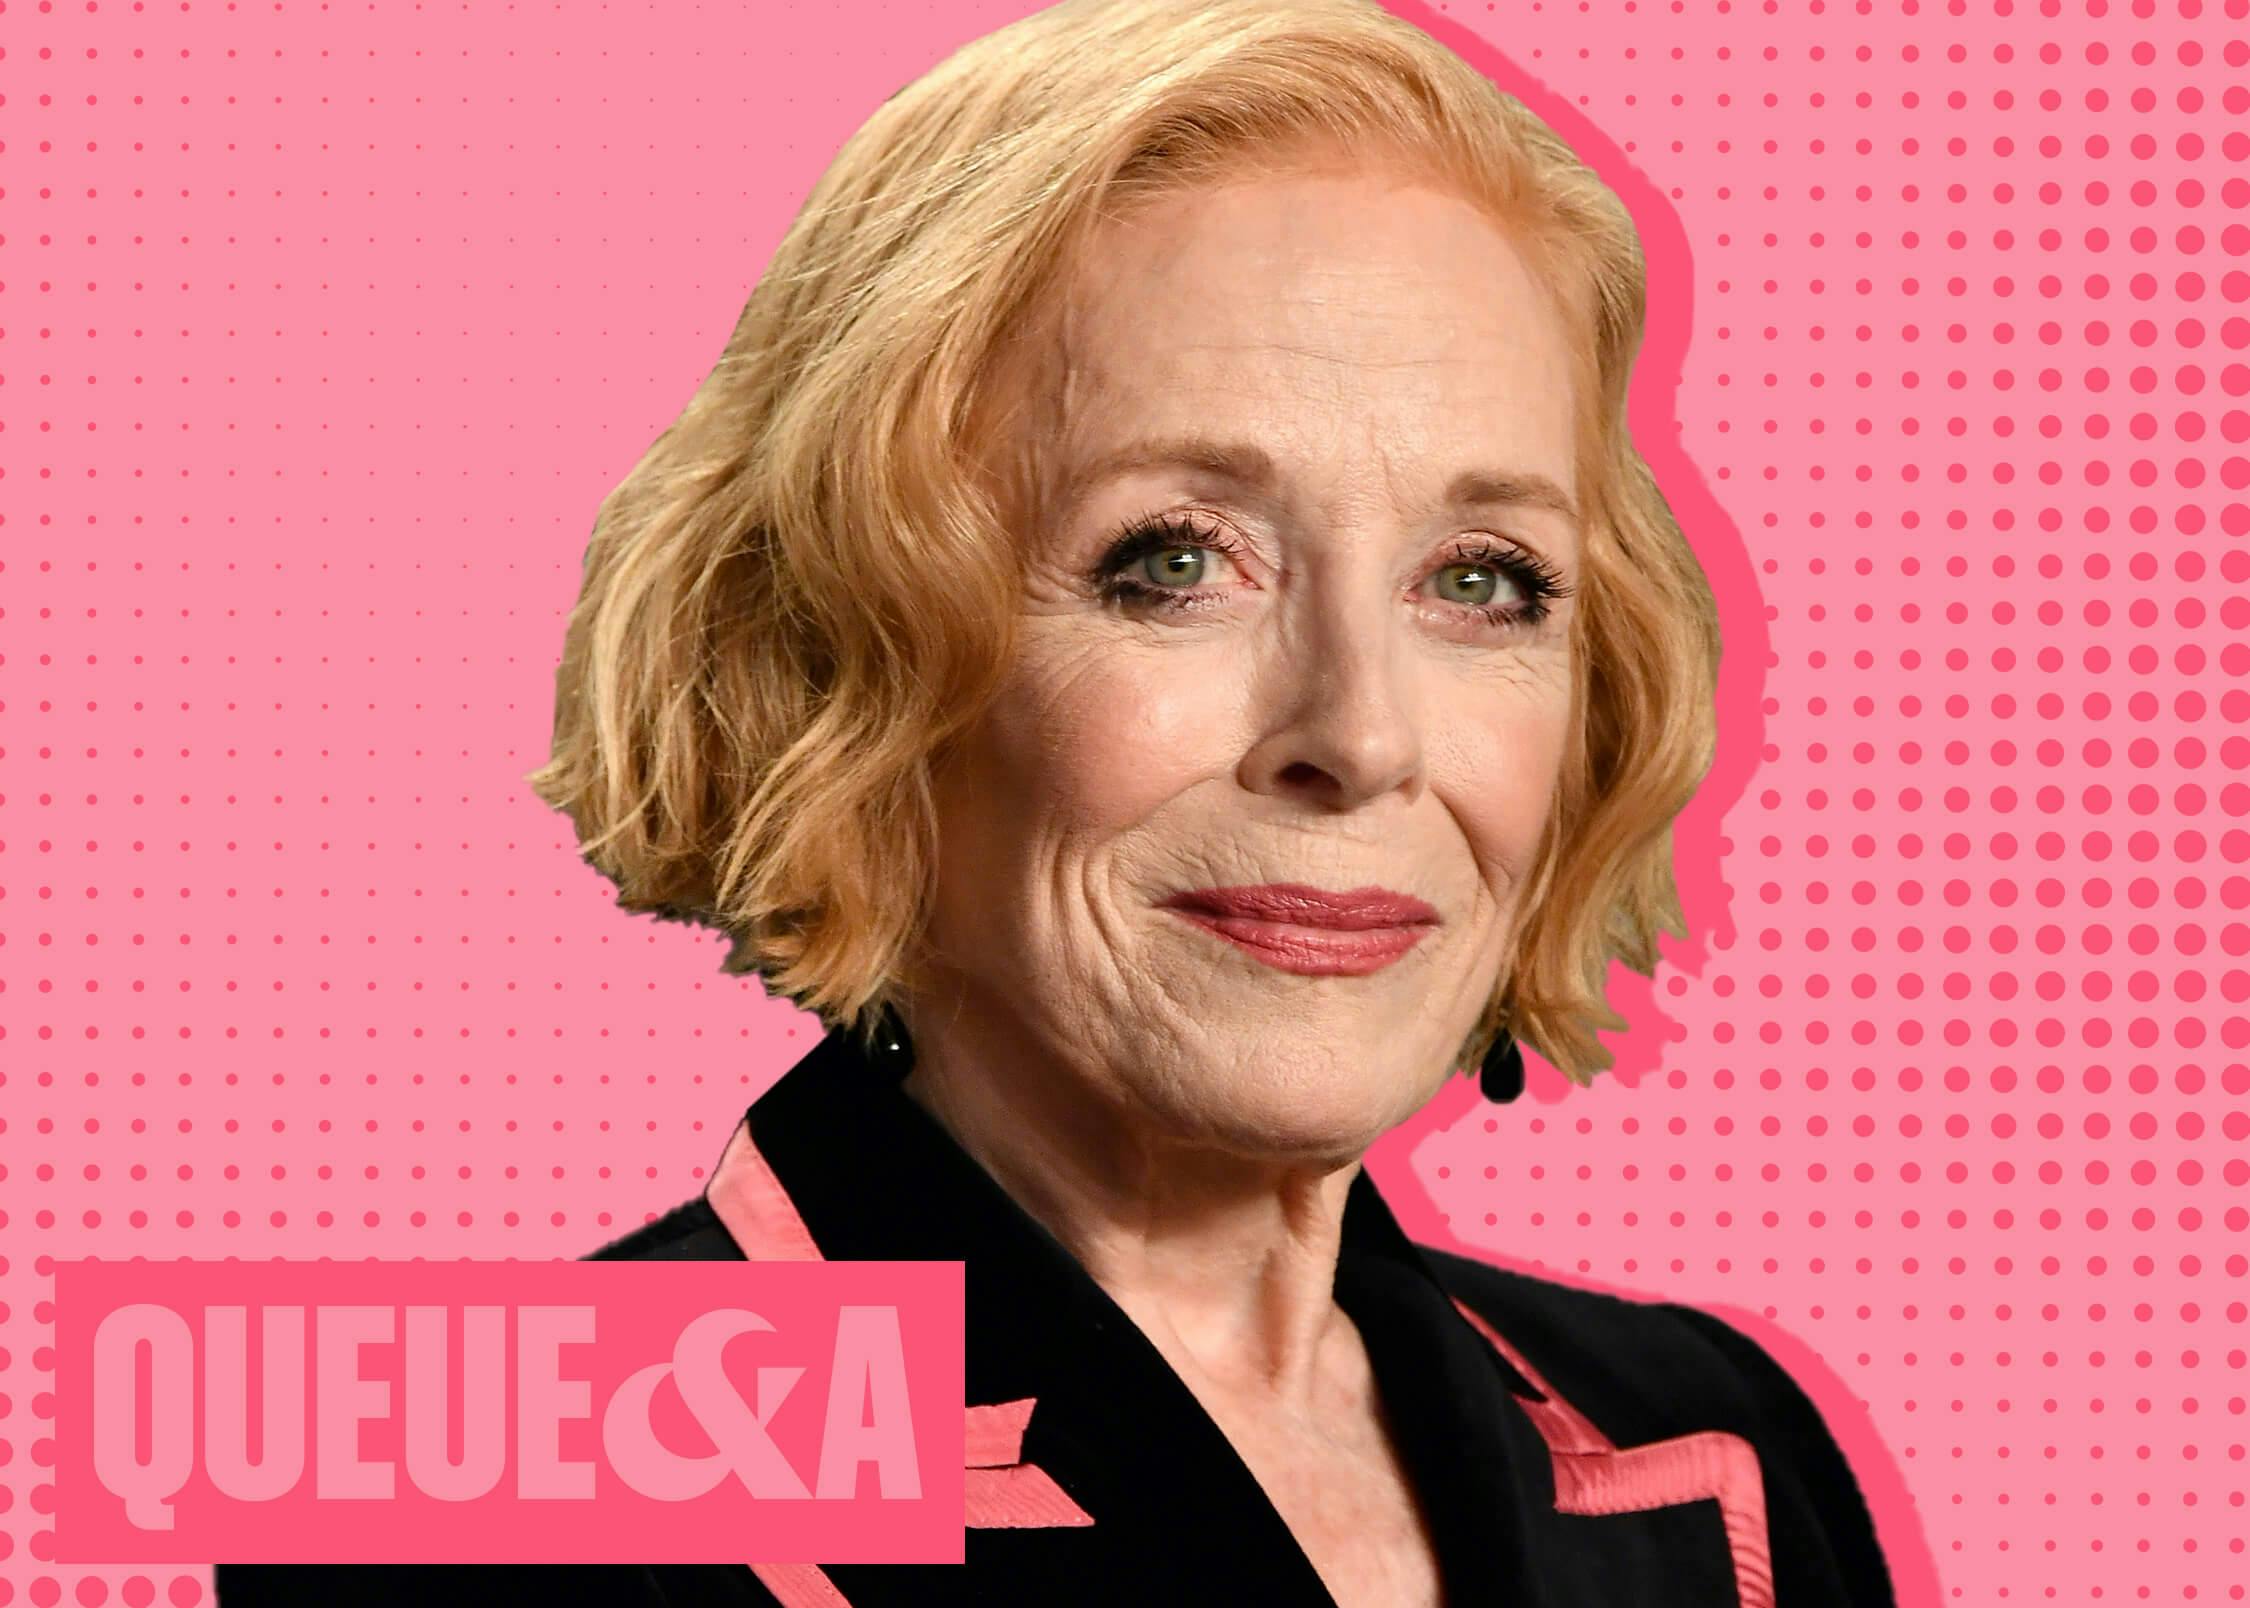 Holland Taylor wears a black blazer trimmed with pink as she smiles slightly. The background is light pink dotted with dark pink and the bottom left corner reads Queue & A.